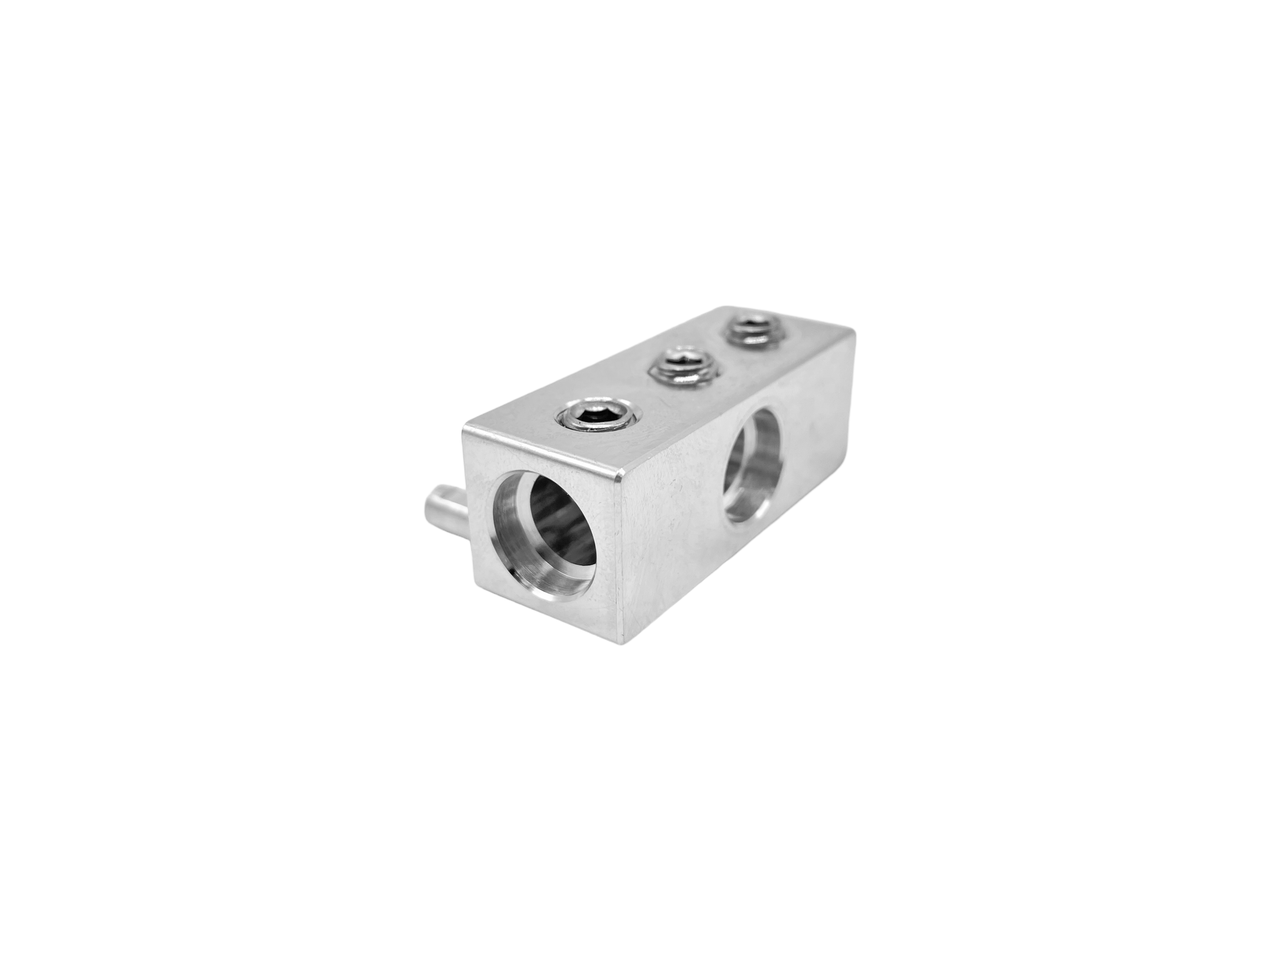 SMD Triple LRC Cable Adapter Block - 3 x 8AWG to 3 x 4AWG (1 Adaptor)